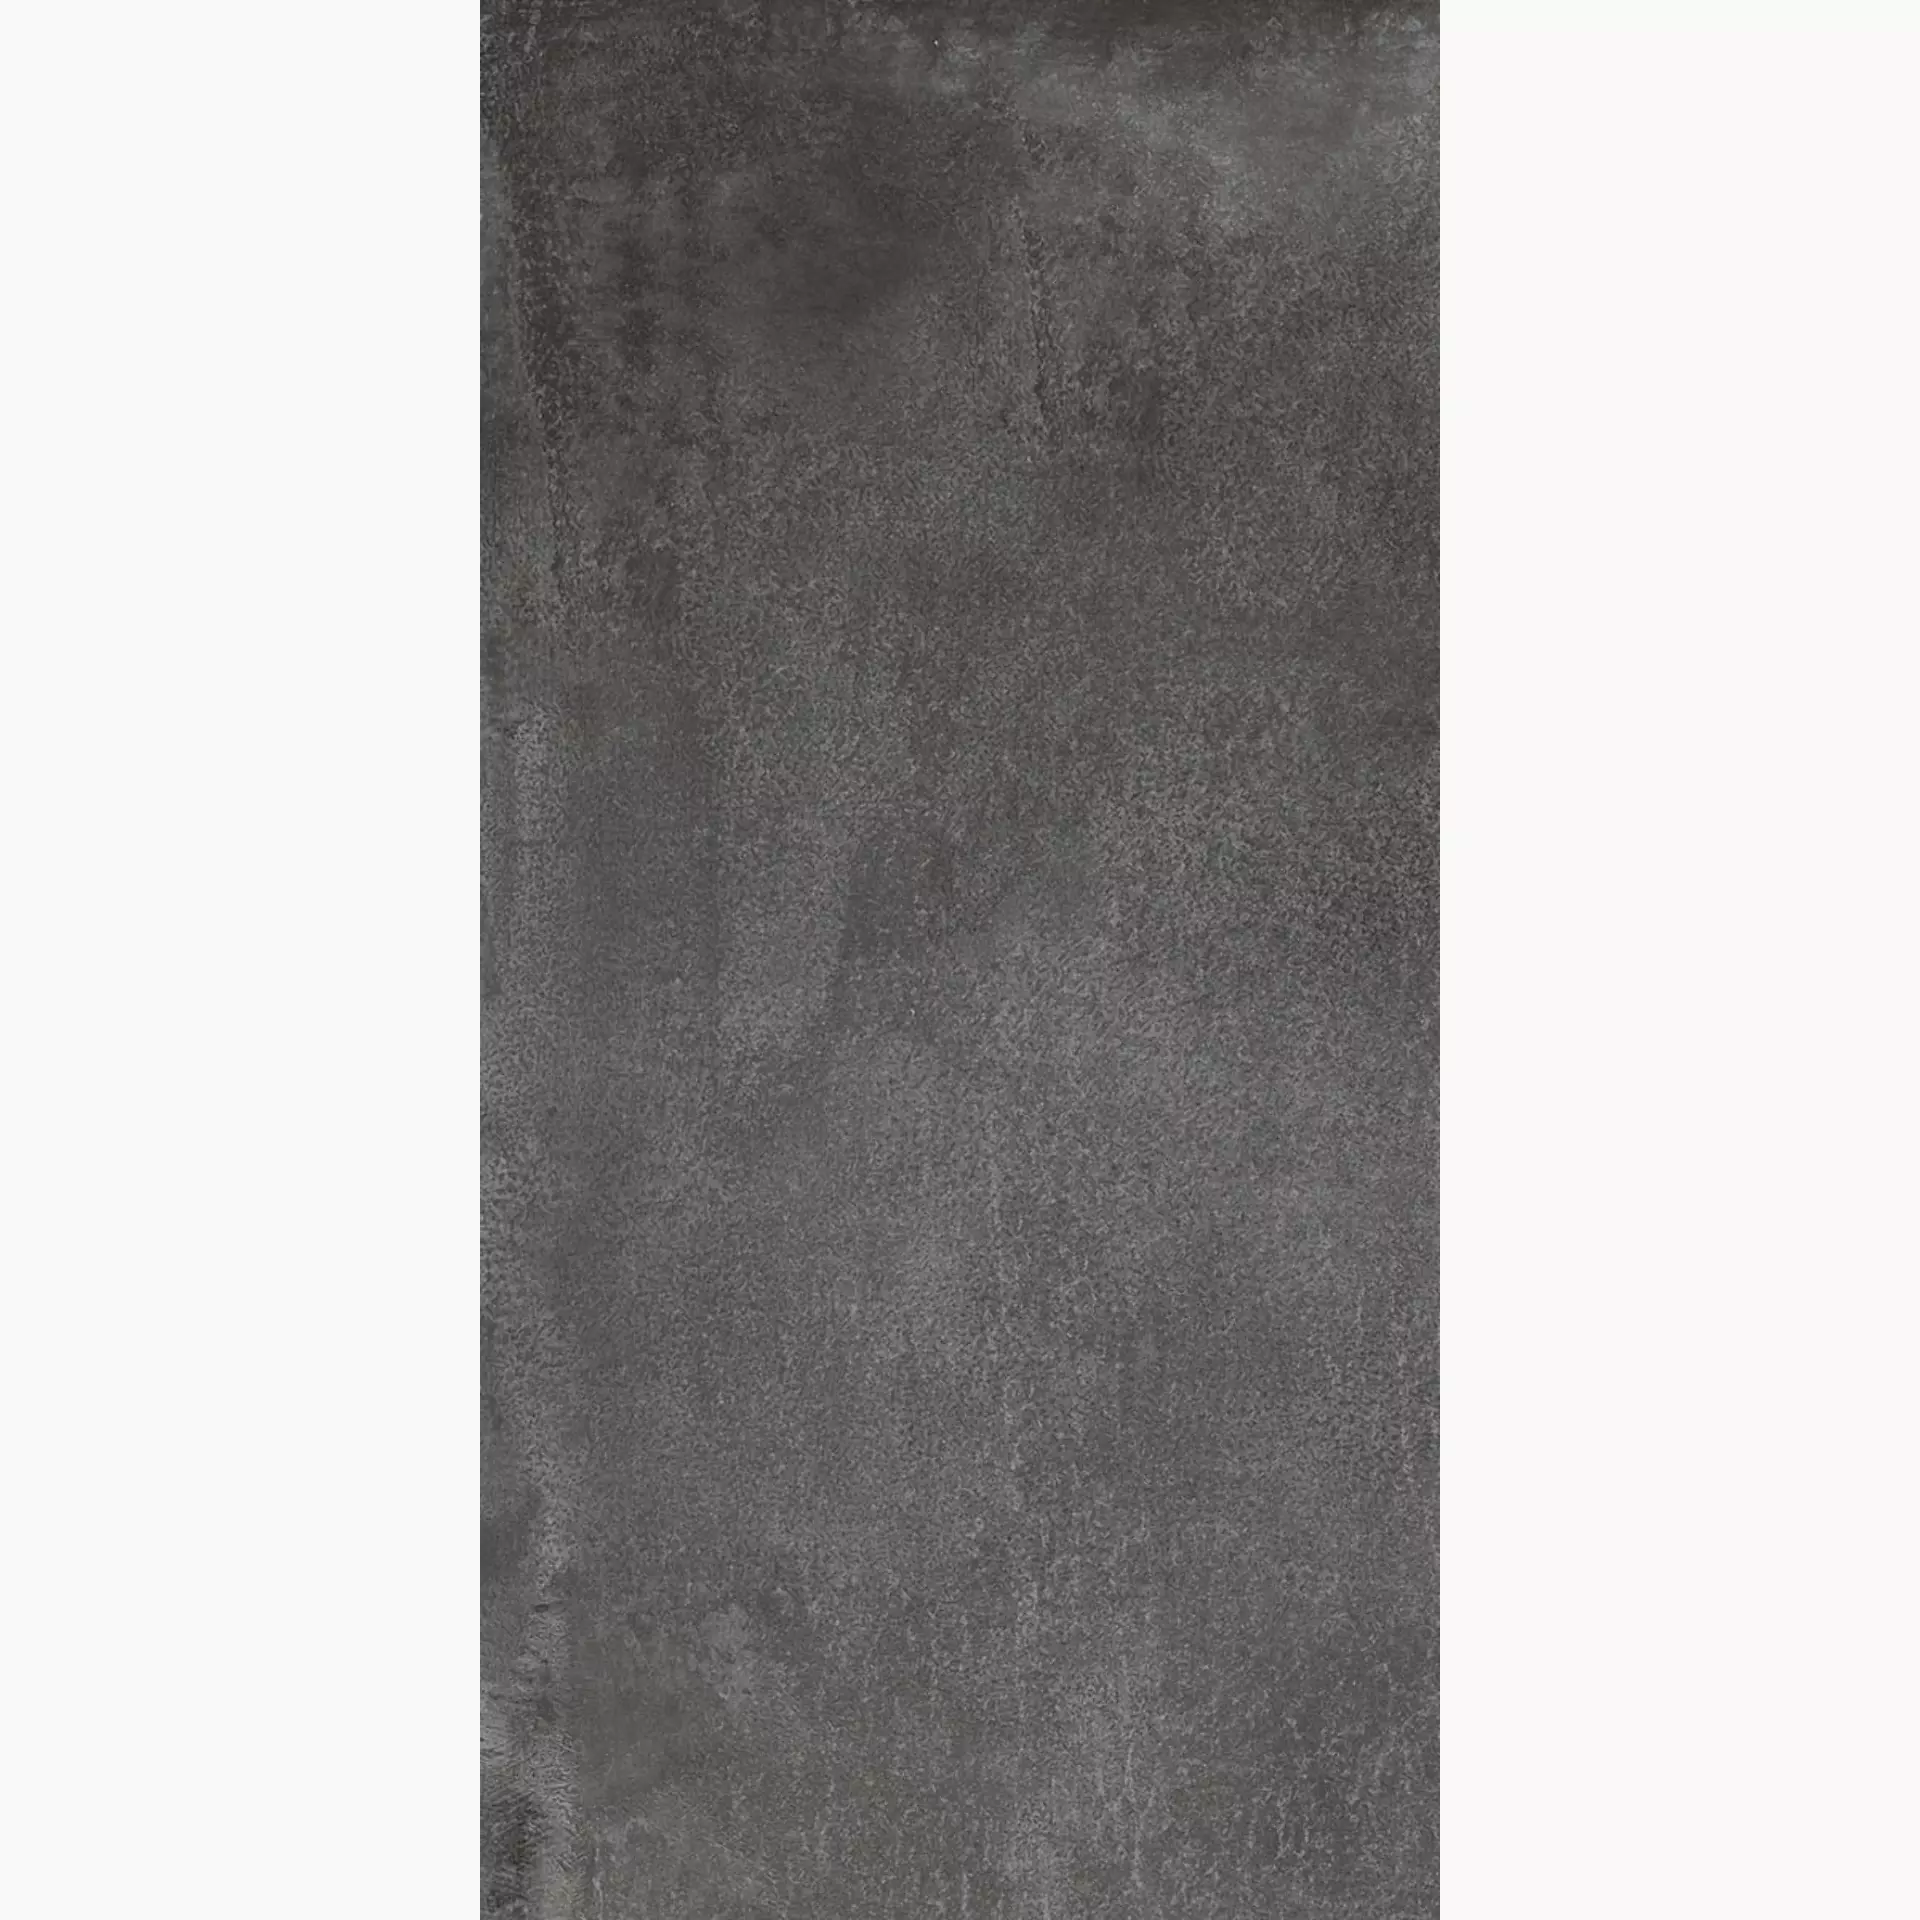 Keope Noord Anthracite Naturale – Matt 45444934 30x60cm rectified 9mm